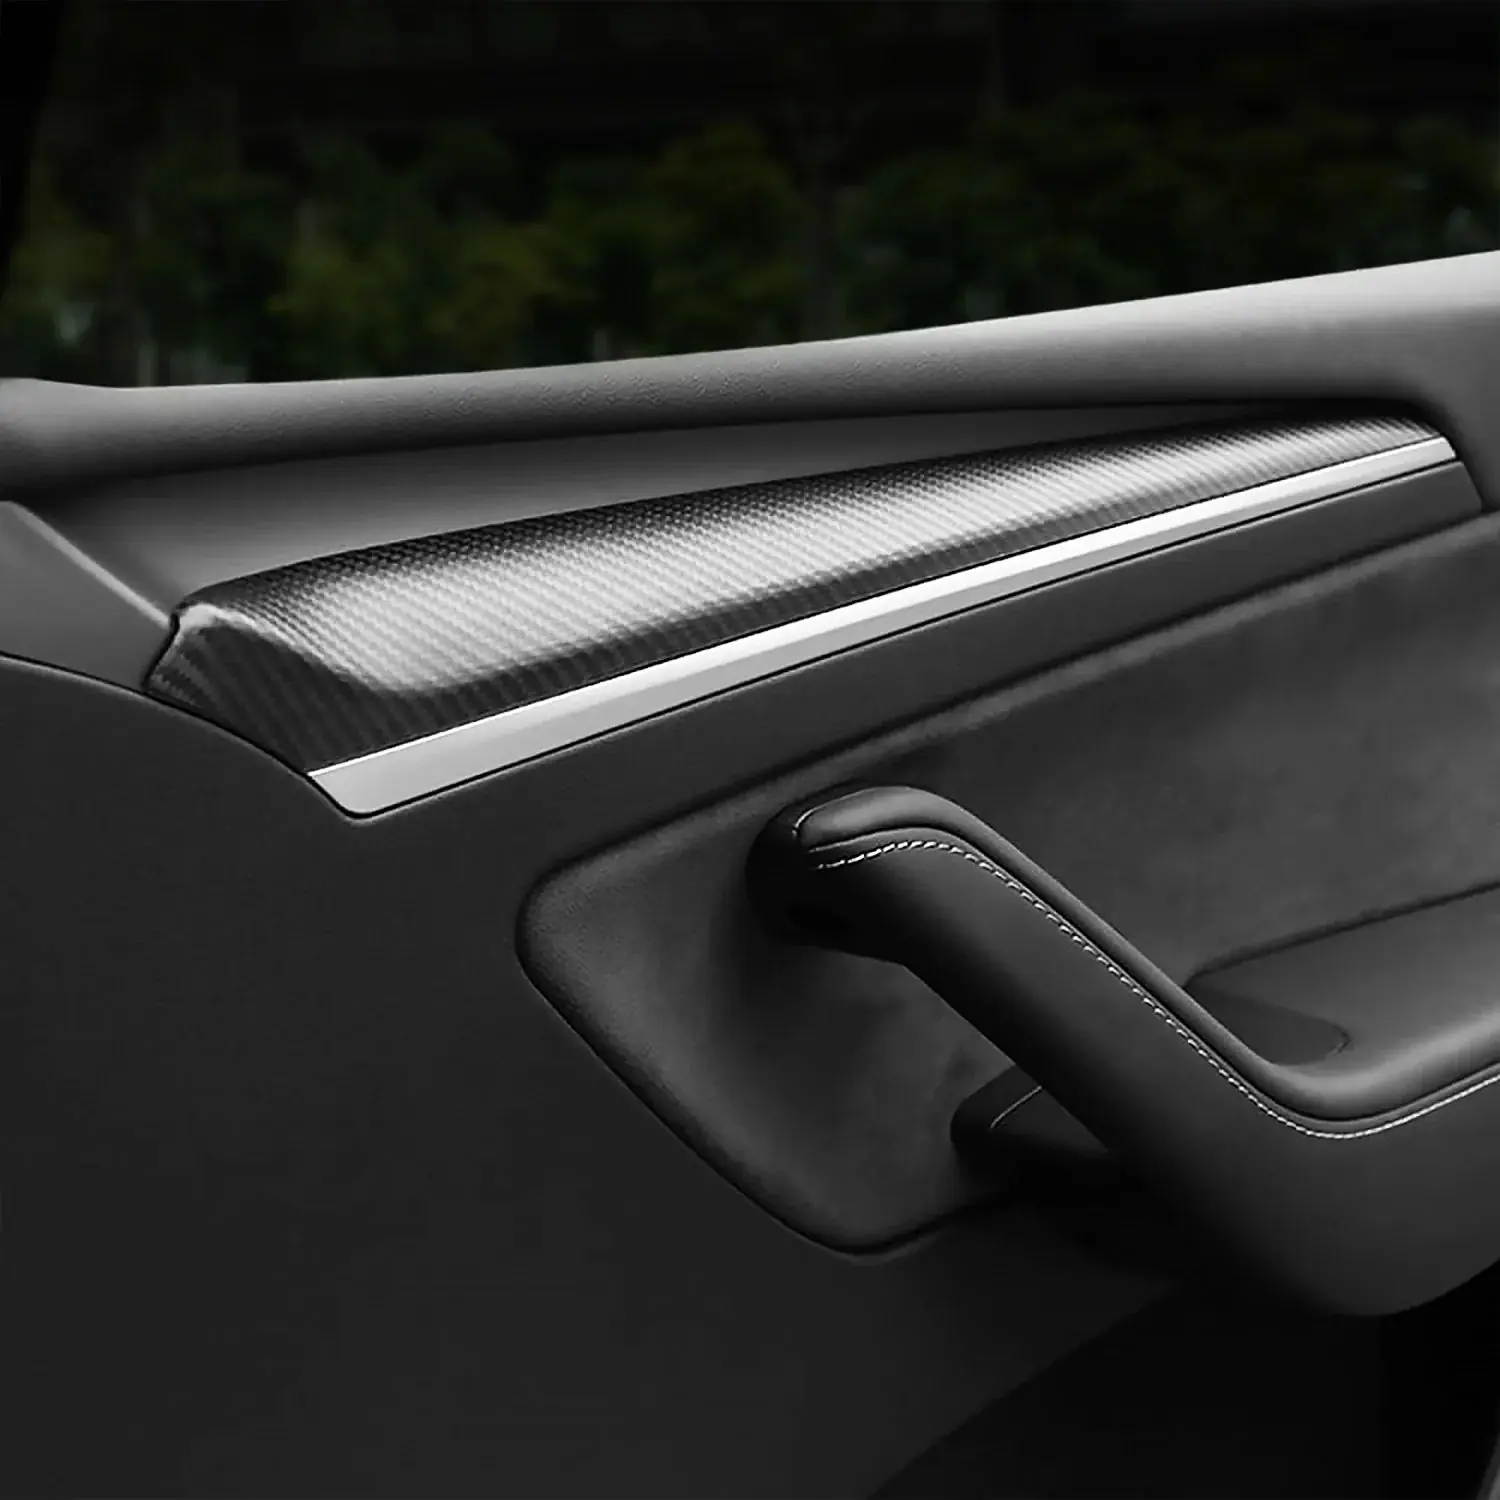 Enhance Your Tesla Model 3 Interior with Adreama's Real Dry Carbon Fiber Door Trim Covers